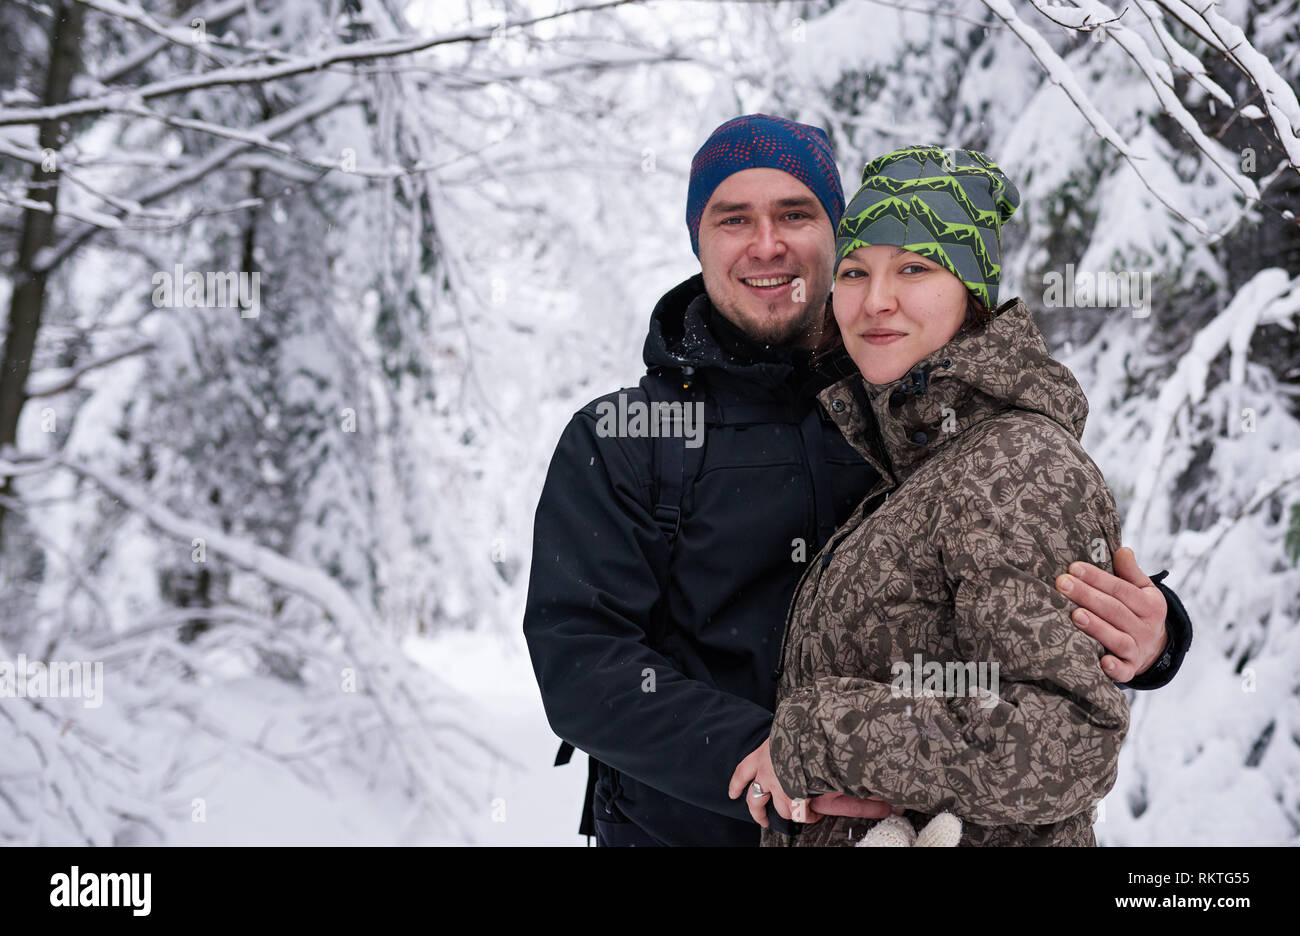 Portrait of a smiling young couple in hiking gear standing arm in arm together in a snow covered forest while out for a winter hike Stock Photo